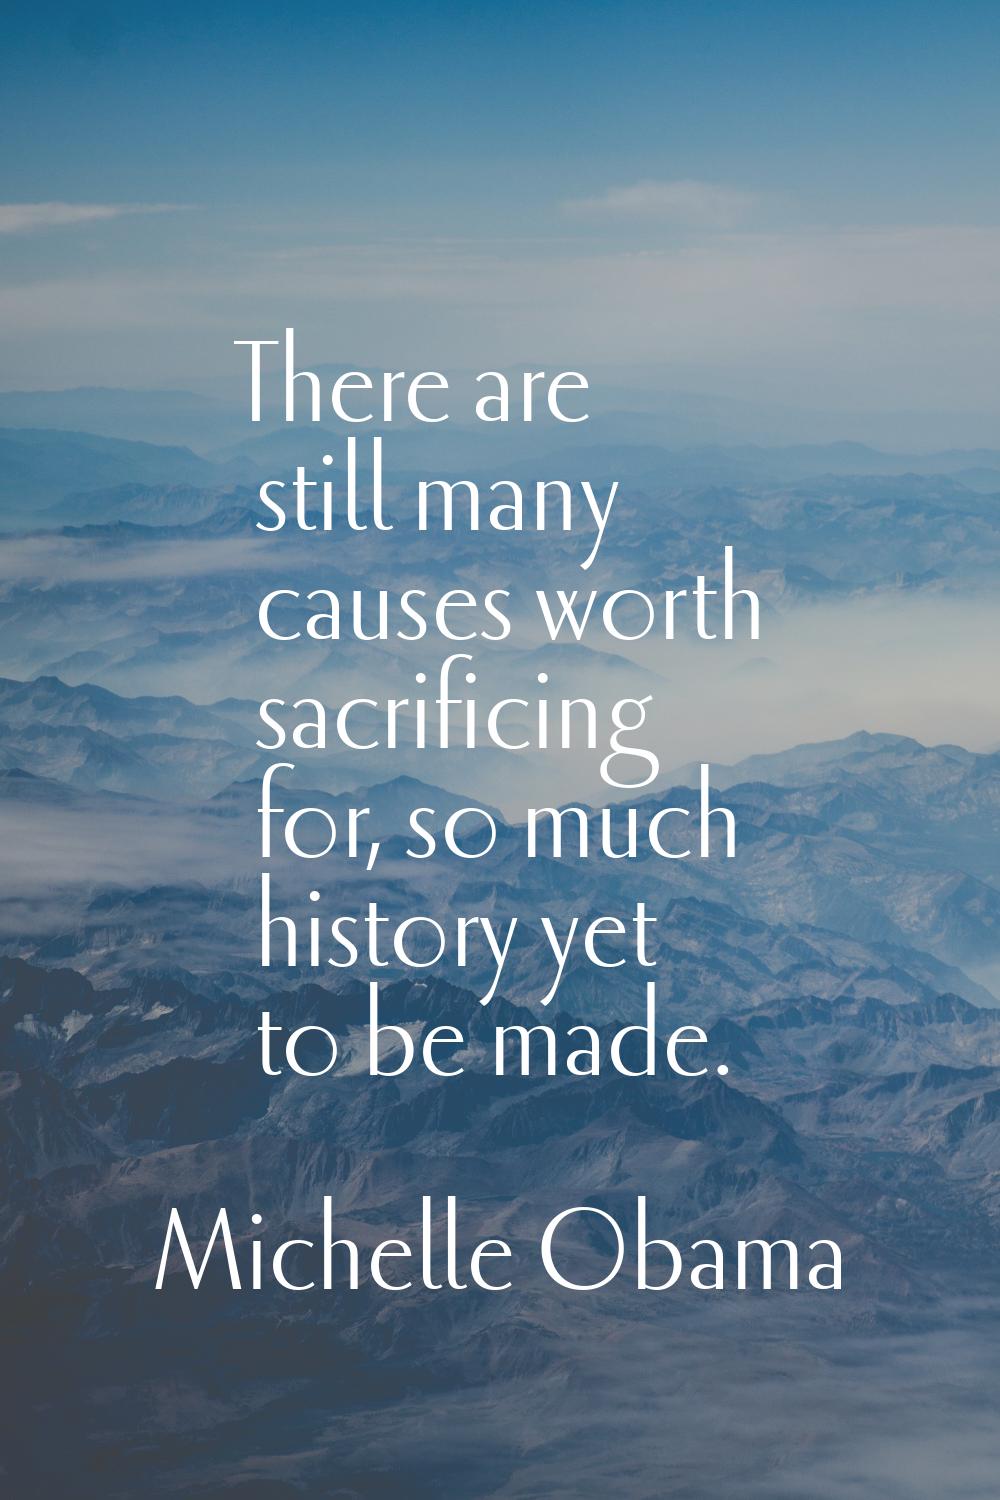 There are still many causes worth sacrificing for, so much history yet to be made.